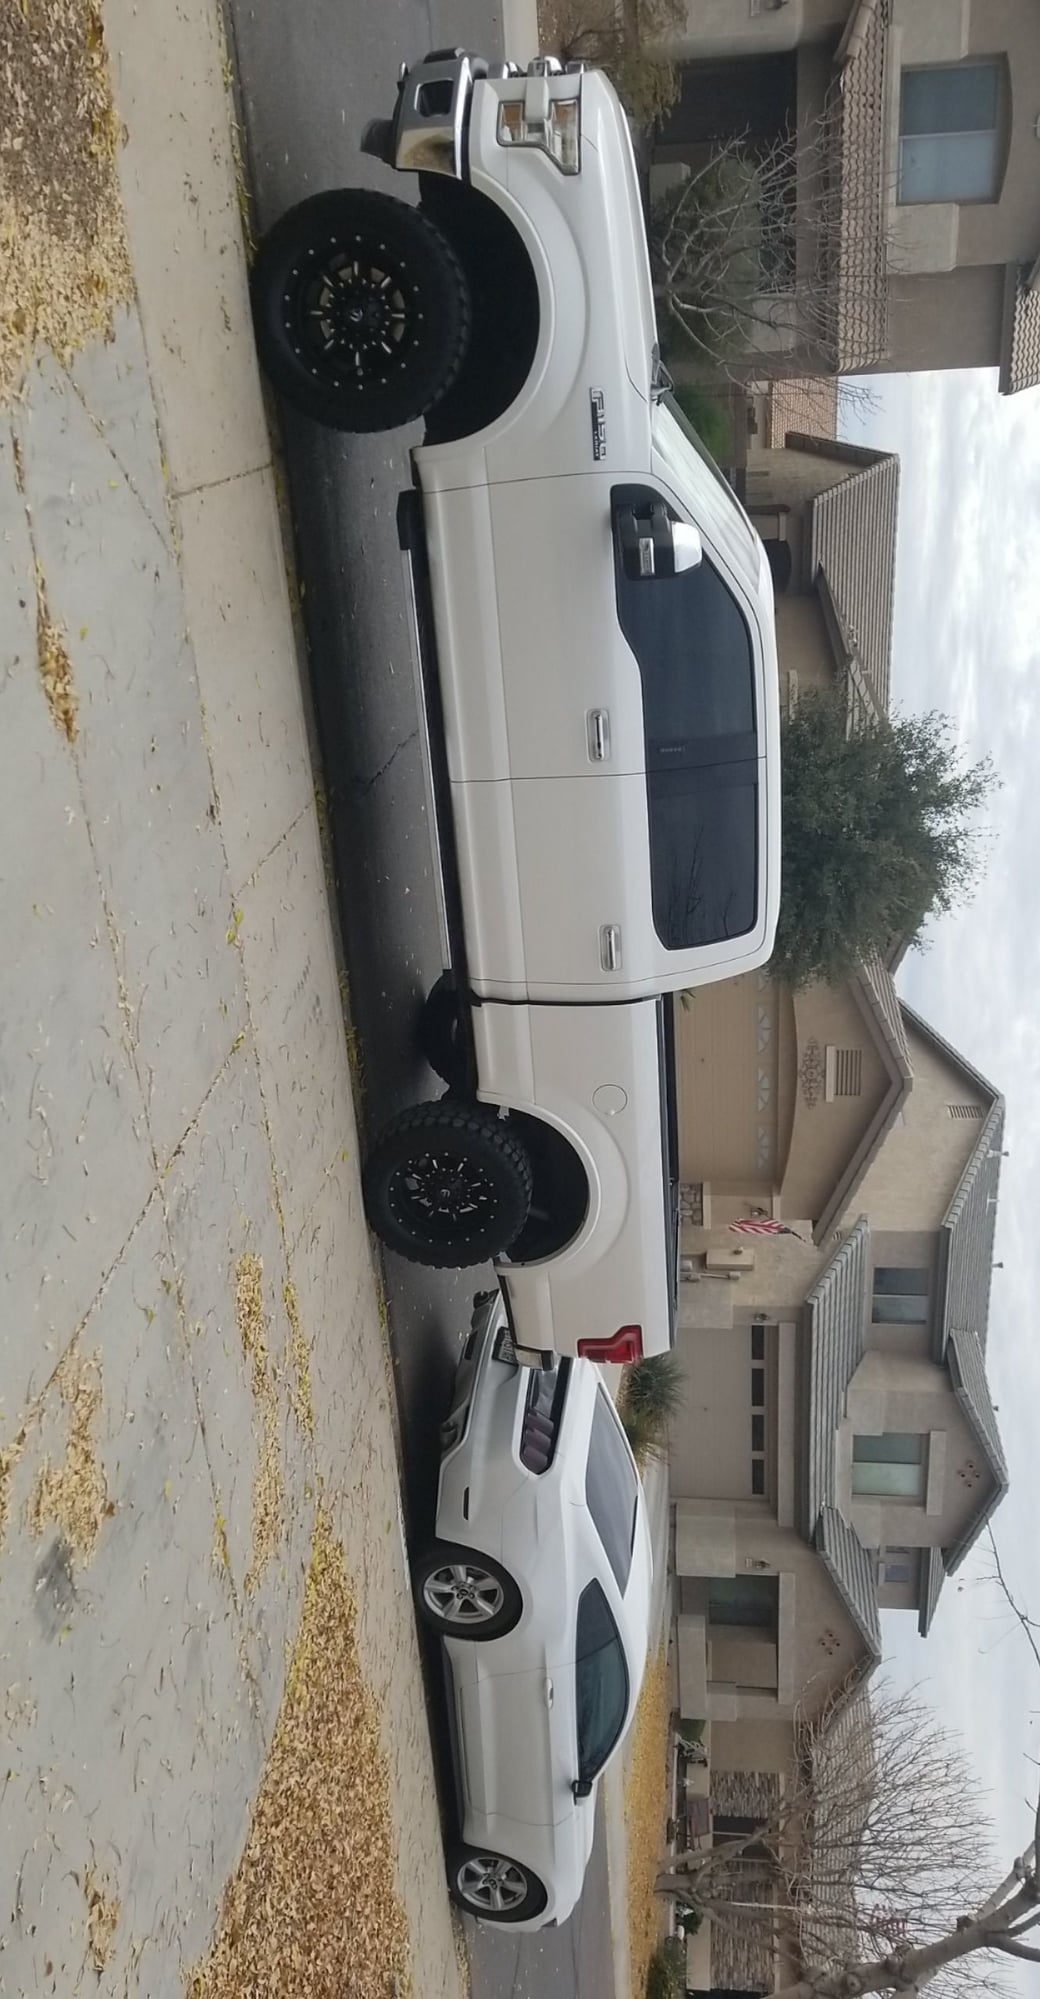 White F150's with black wheels lets see them - Page 6 - Ford F150 Forum ...